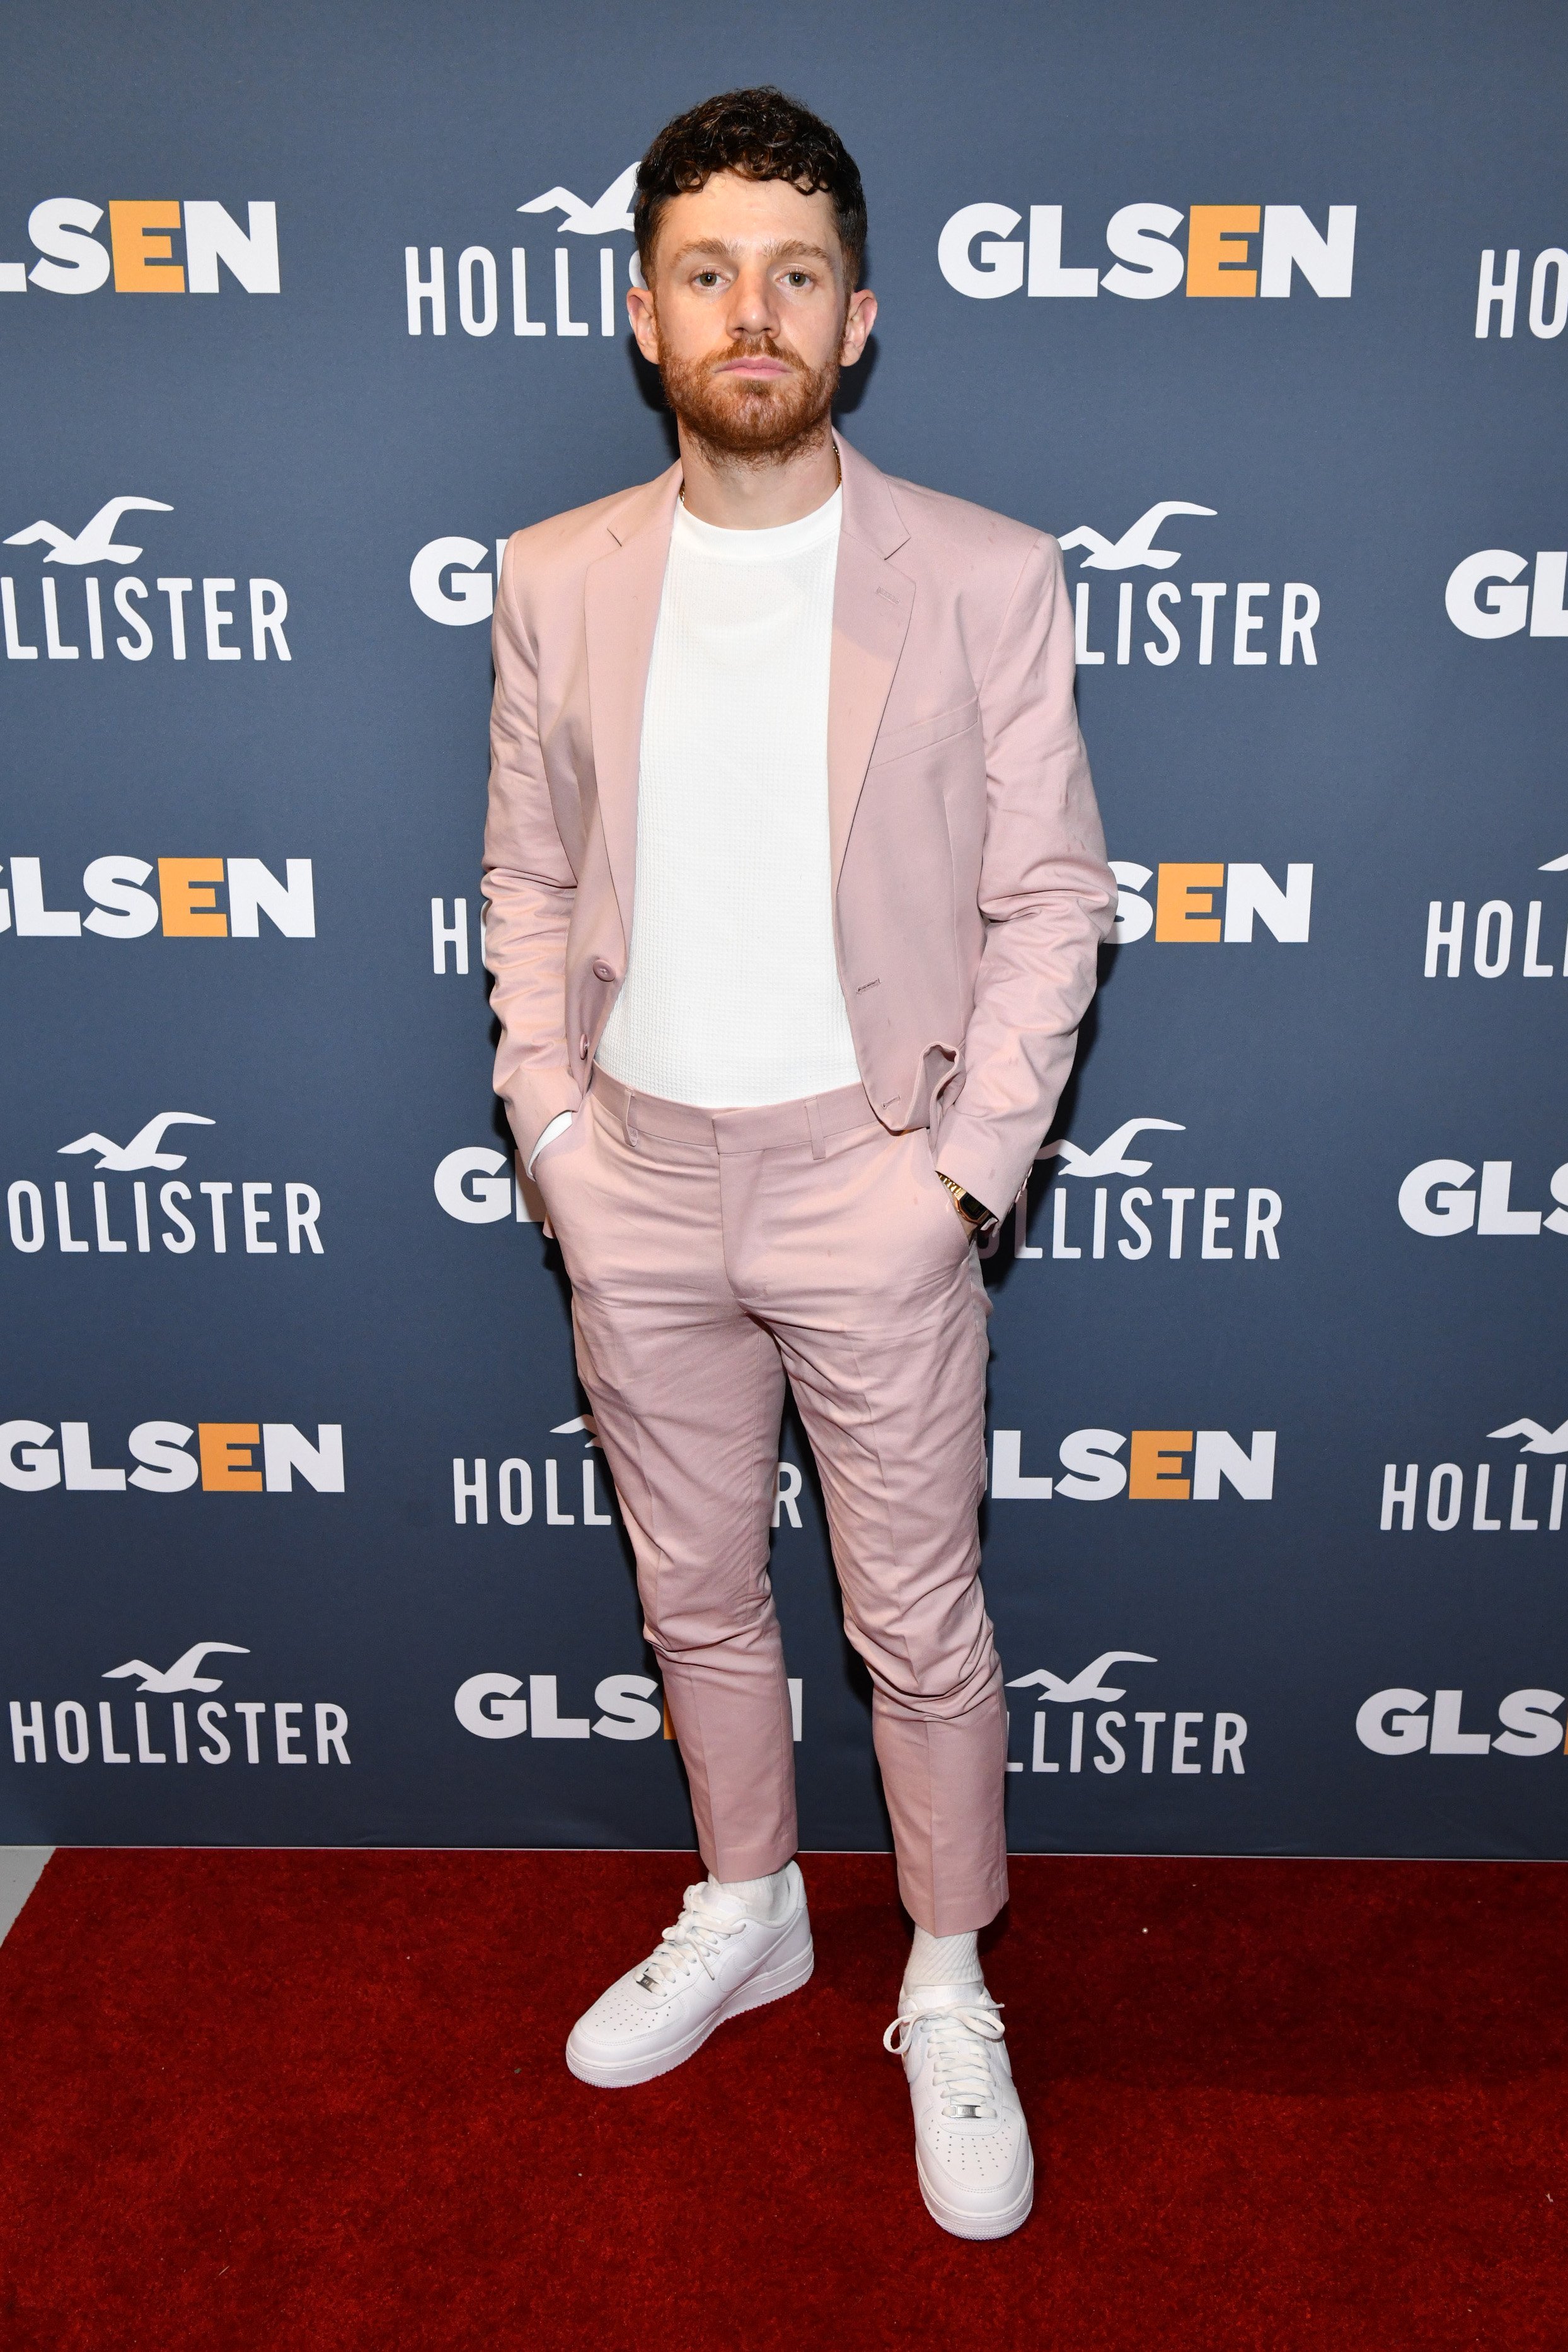 Chris Perfetti on May 16, 2022, at The 2022 GLSEN Respect Awards in New York City. | Source: Getty Images